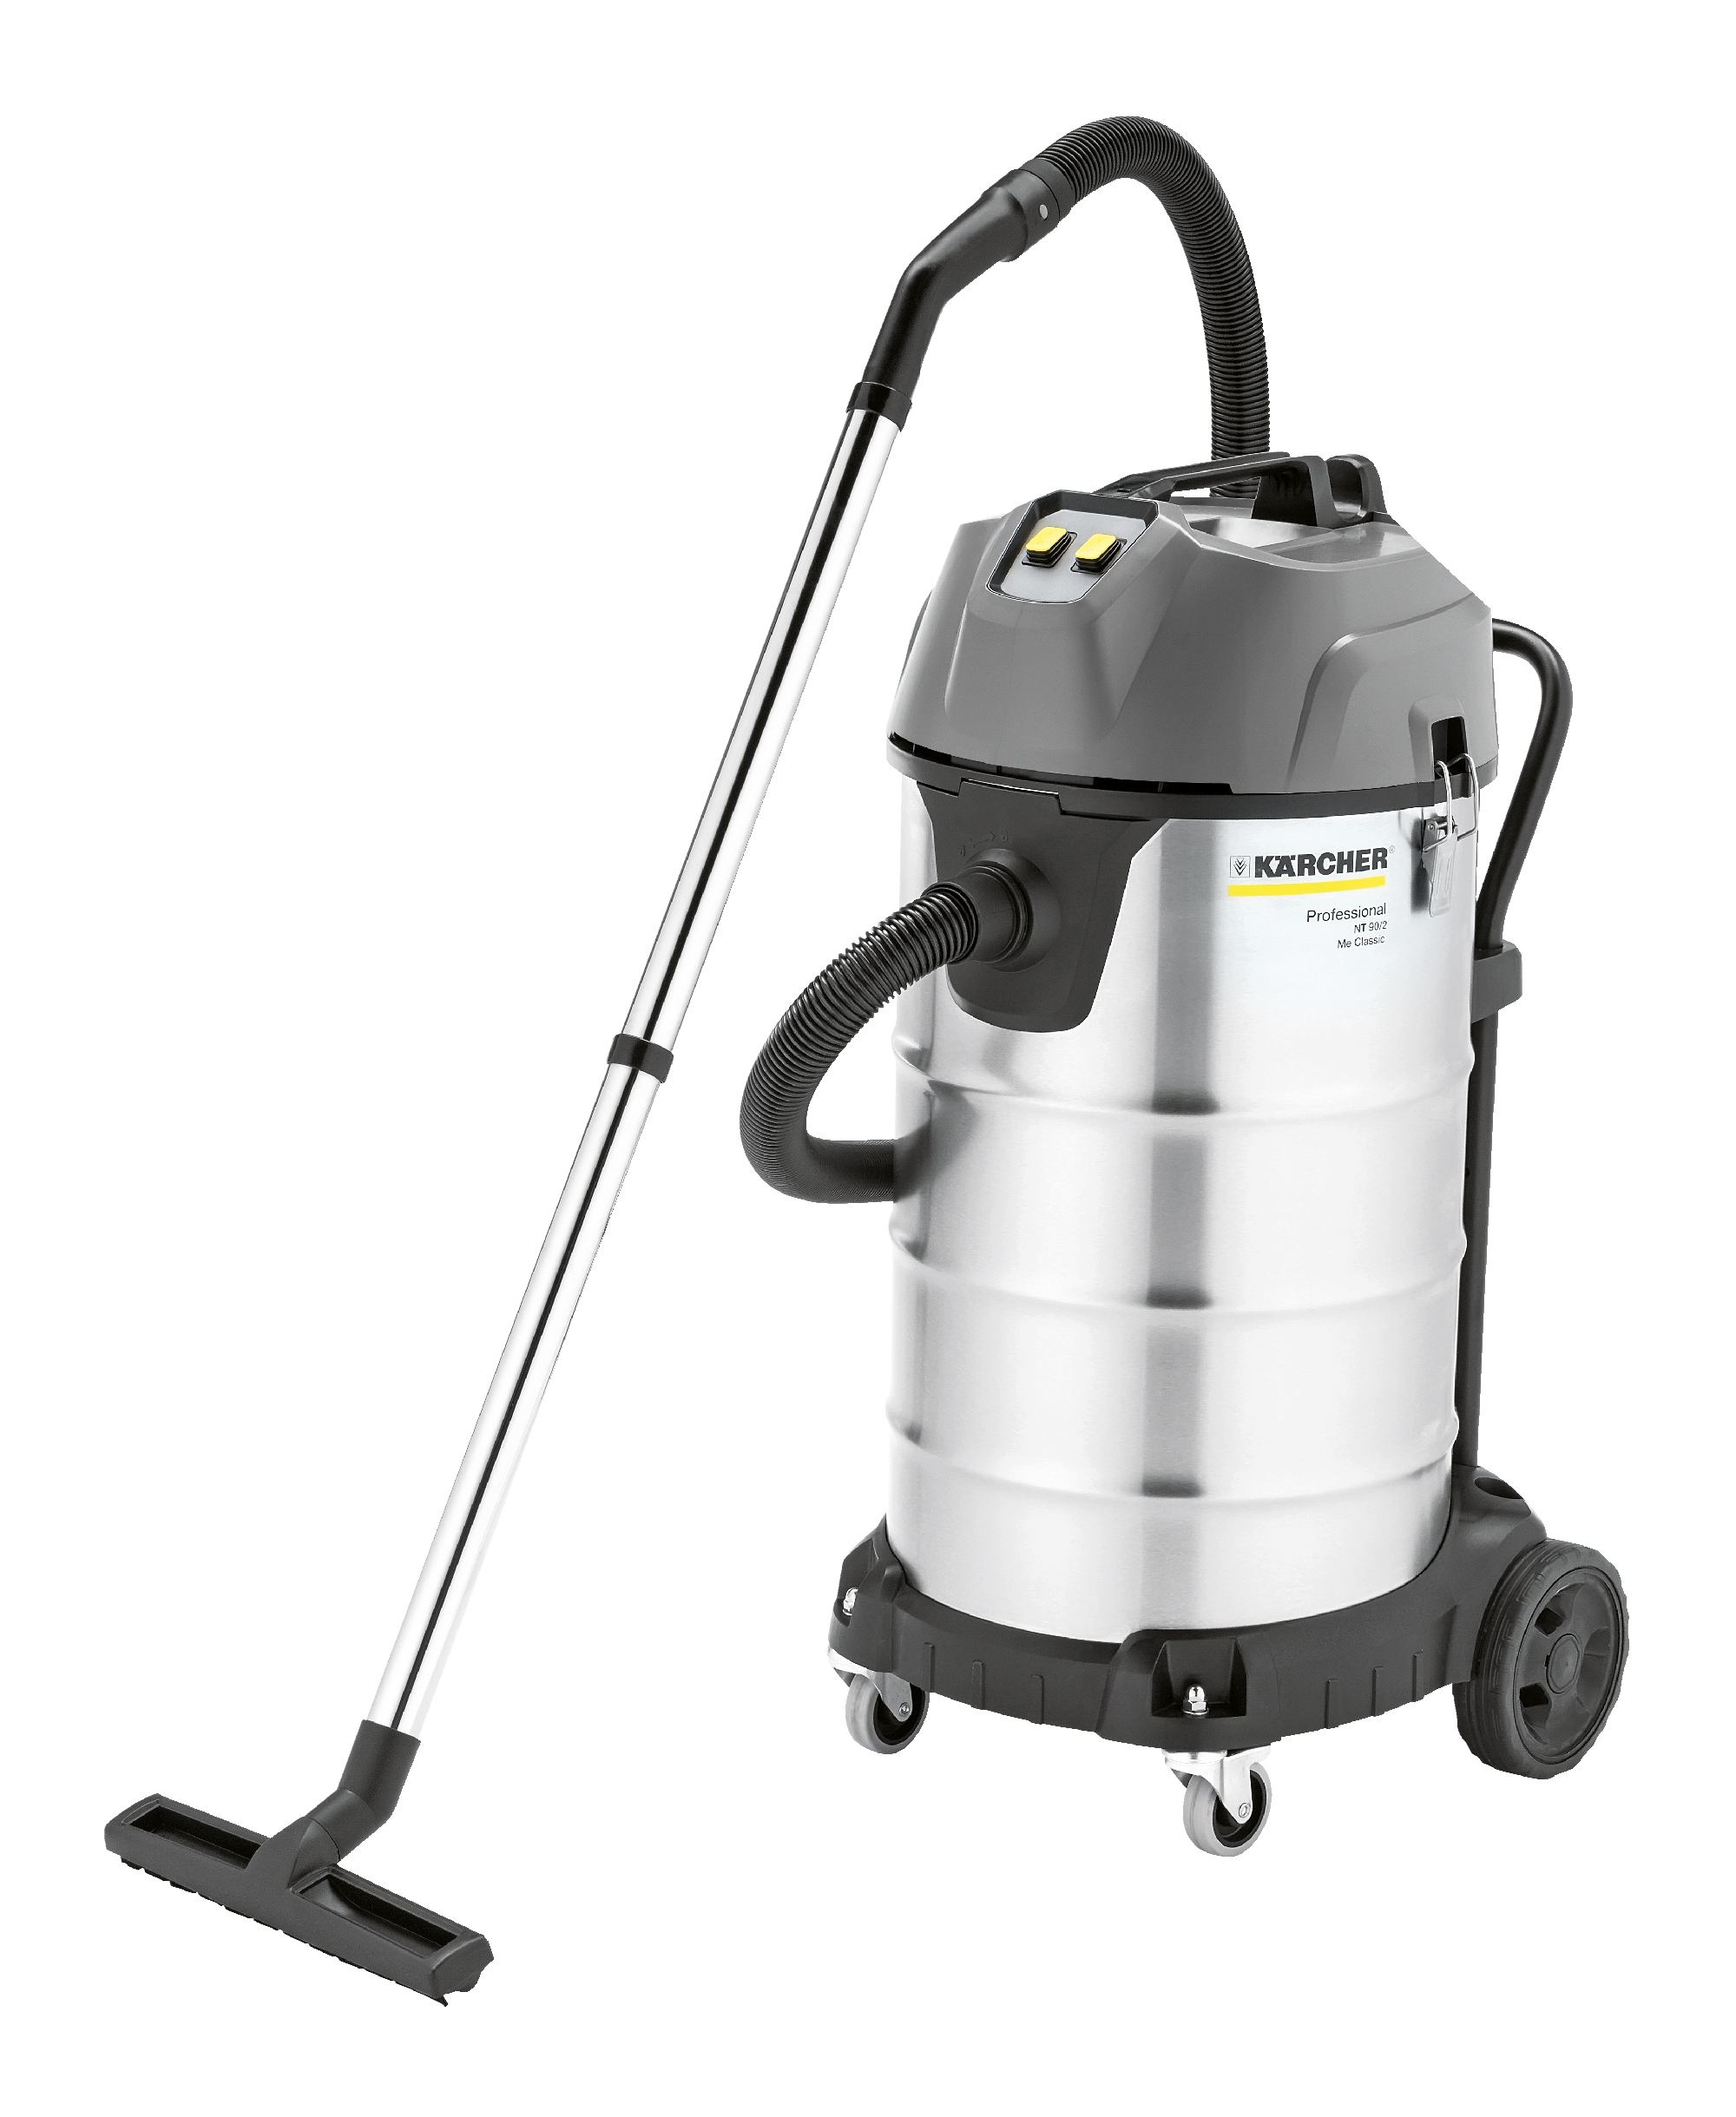 goods/nt-902-me-classic-edition-pylesos-karcher-1667-700.png